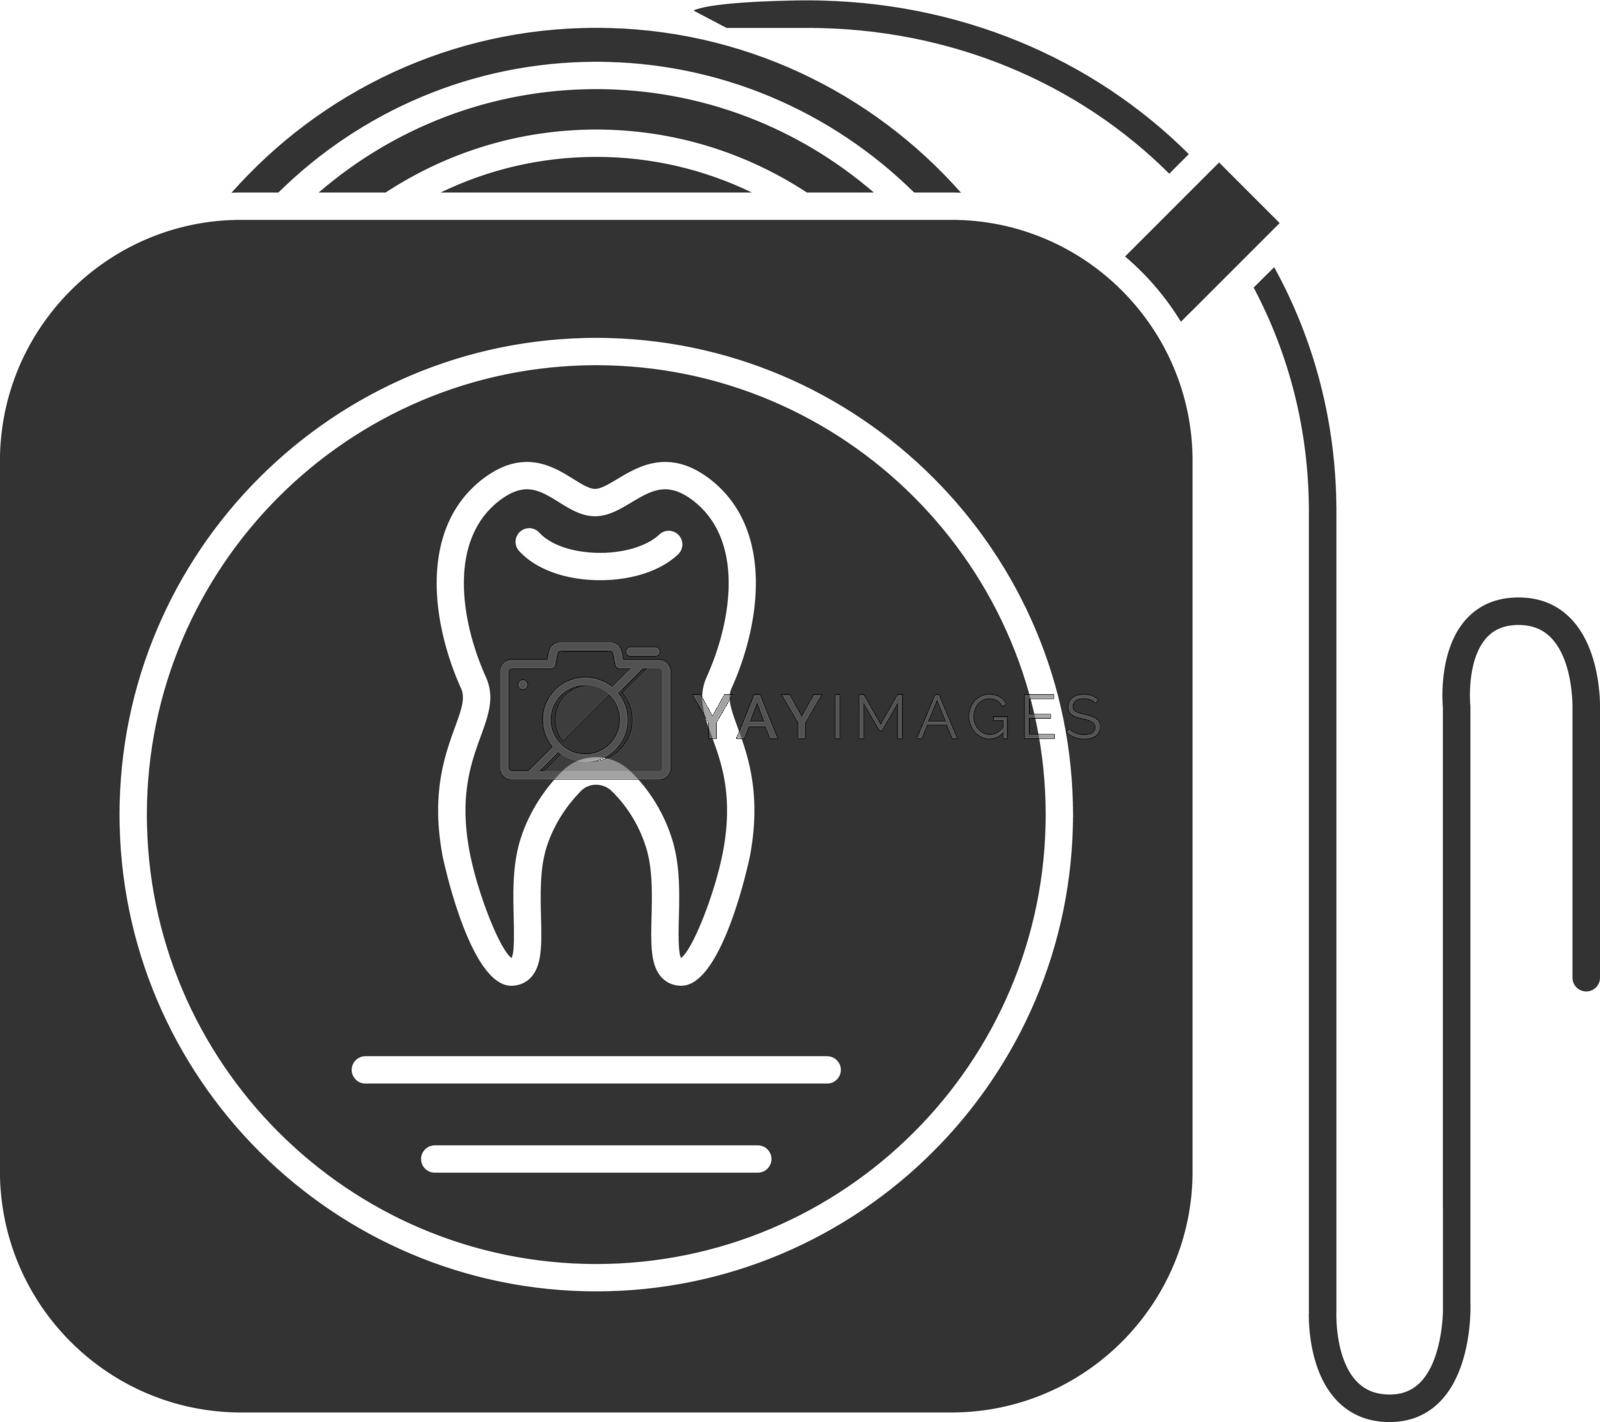 Dental floss glyph icon. Teeth cleaning. Silhouette symbol. Negative space. Vector isolated illustration